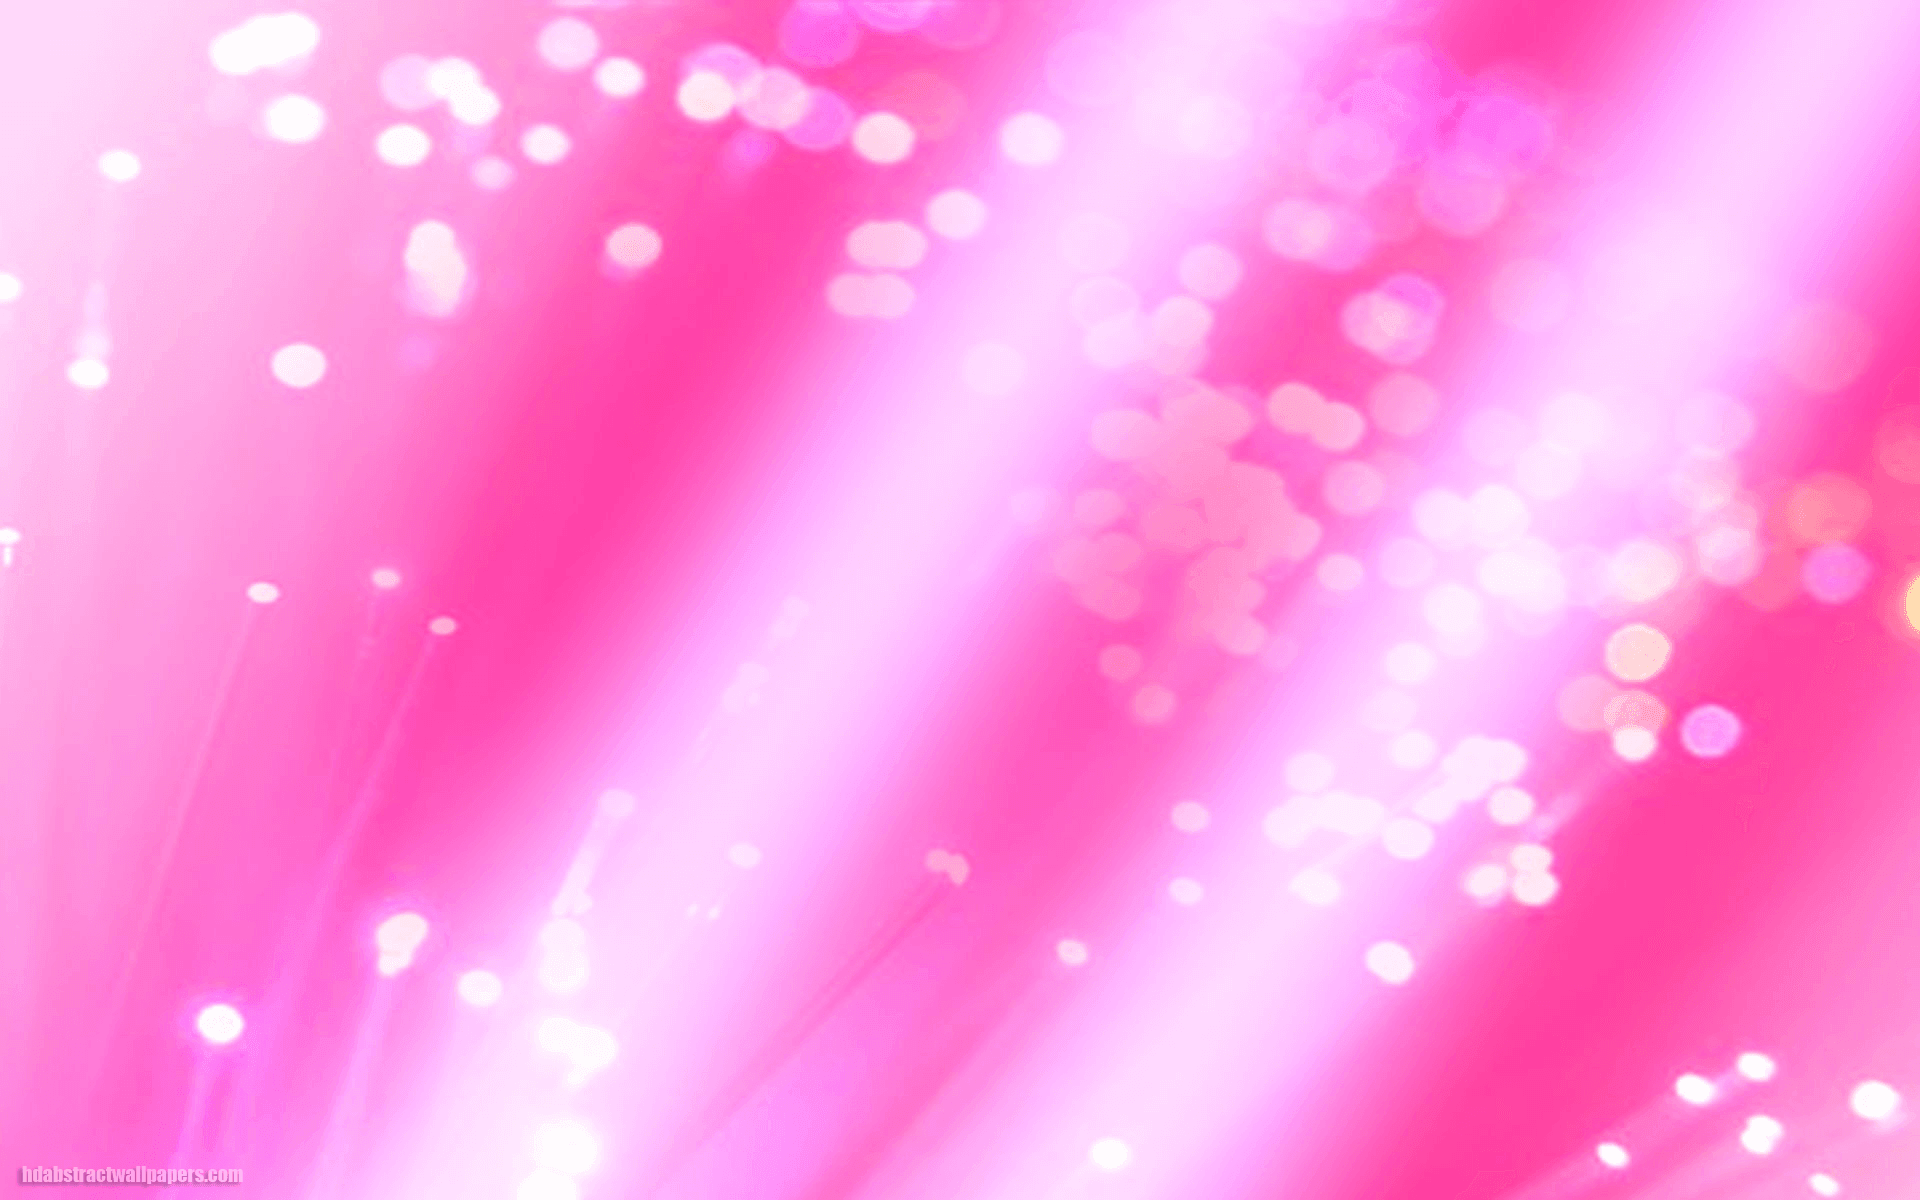 Pink abstract wallpaper with lights and circles HD